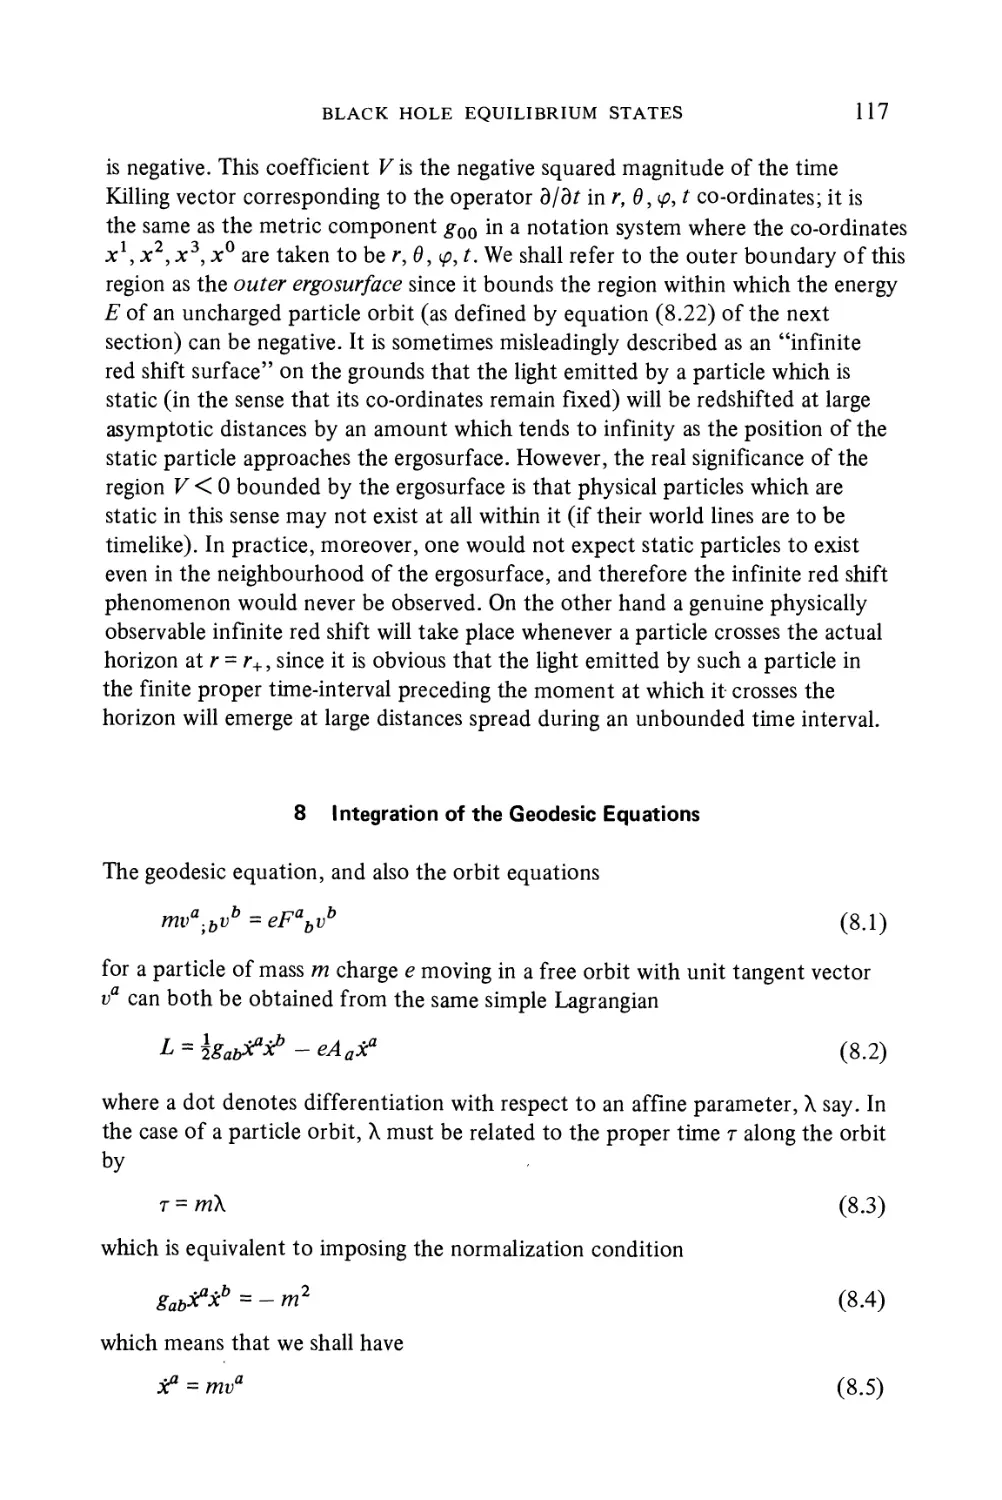 8 Integration of the Geodesic Equations